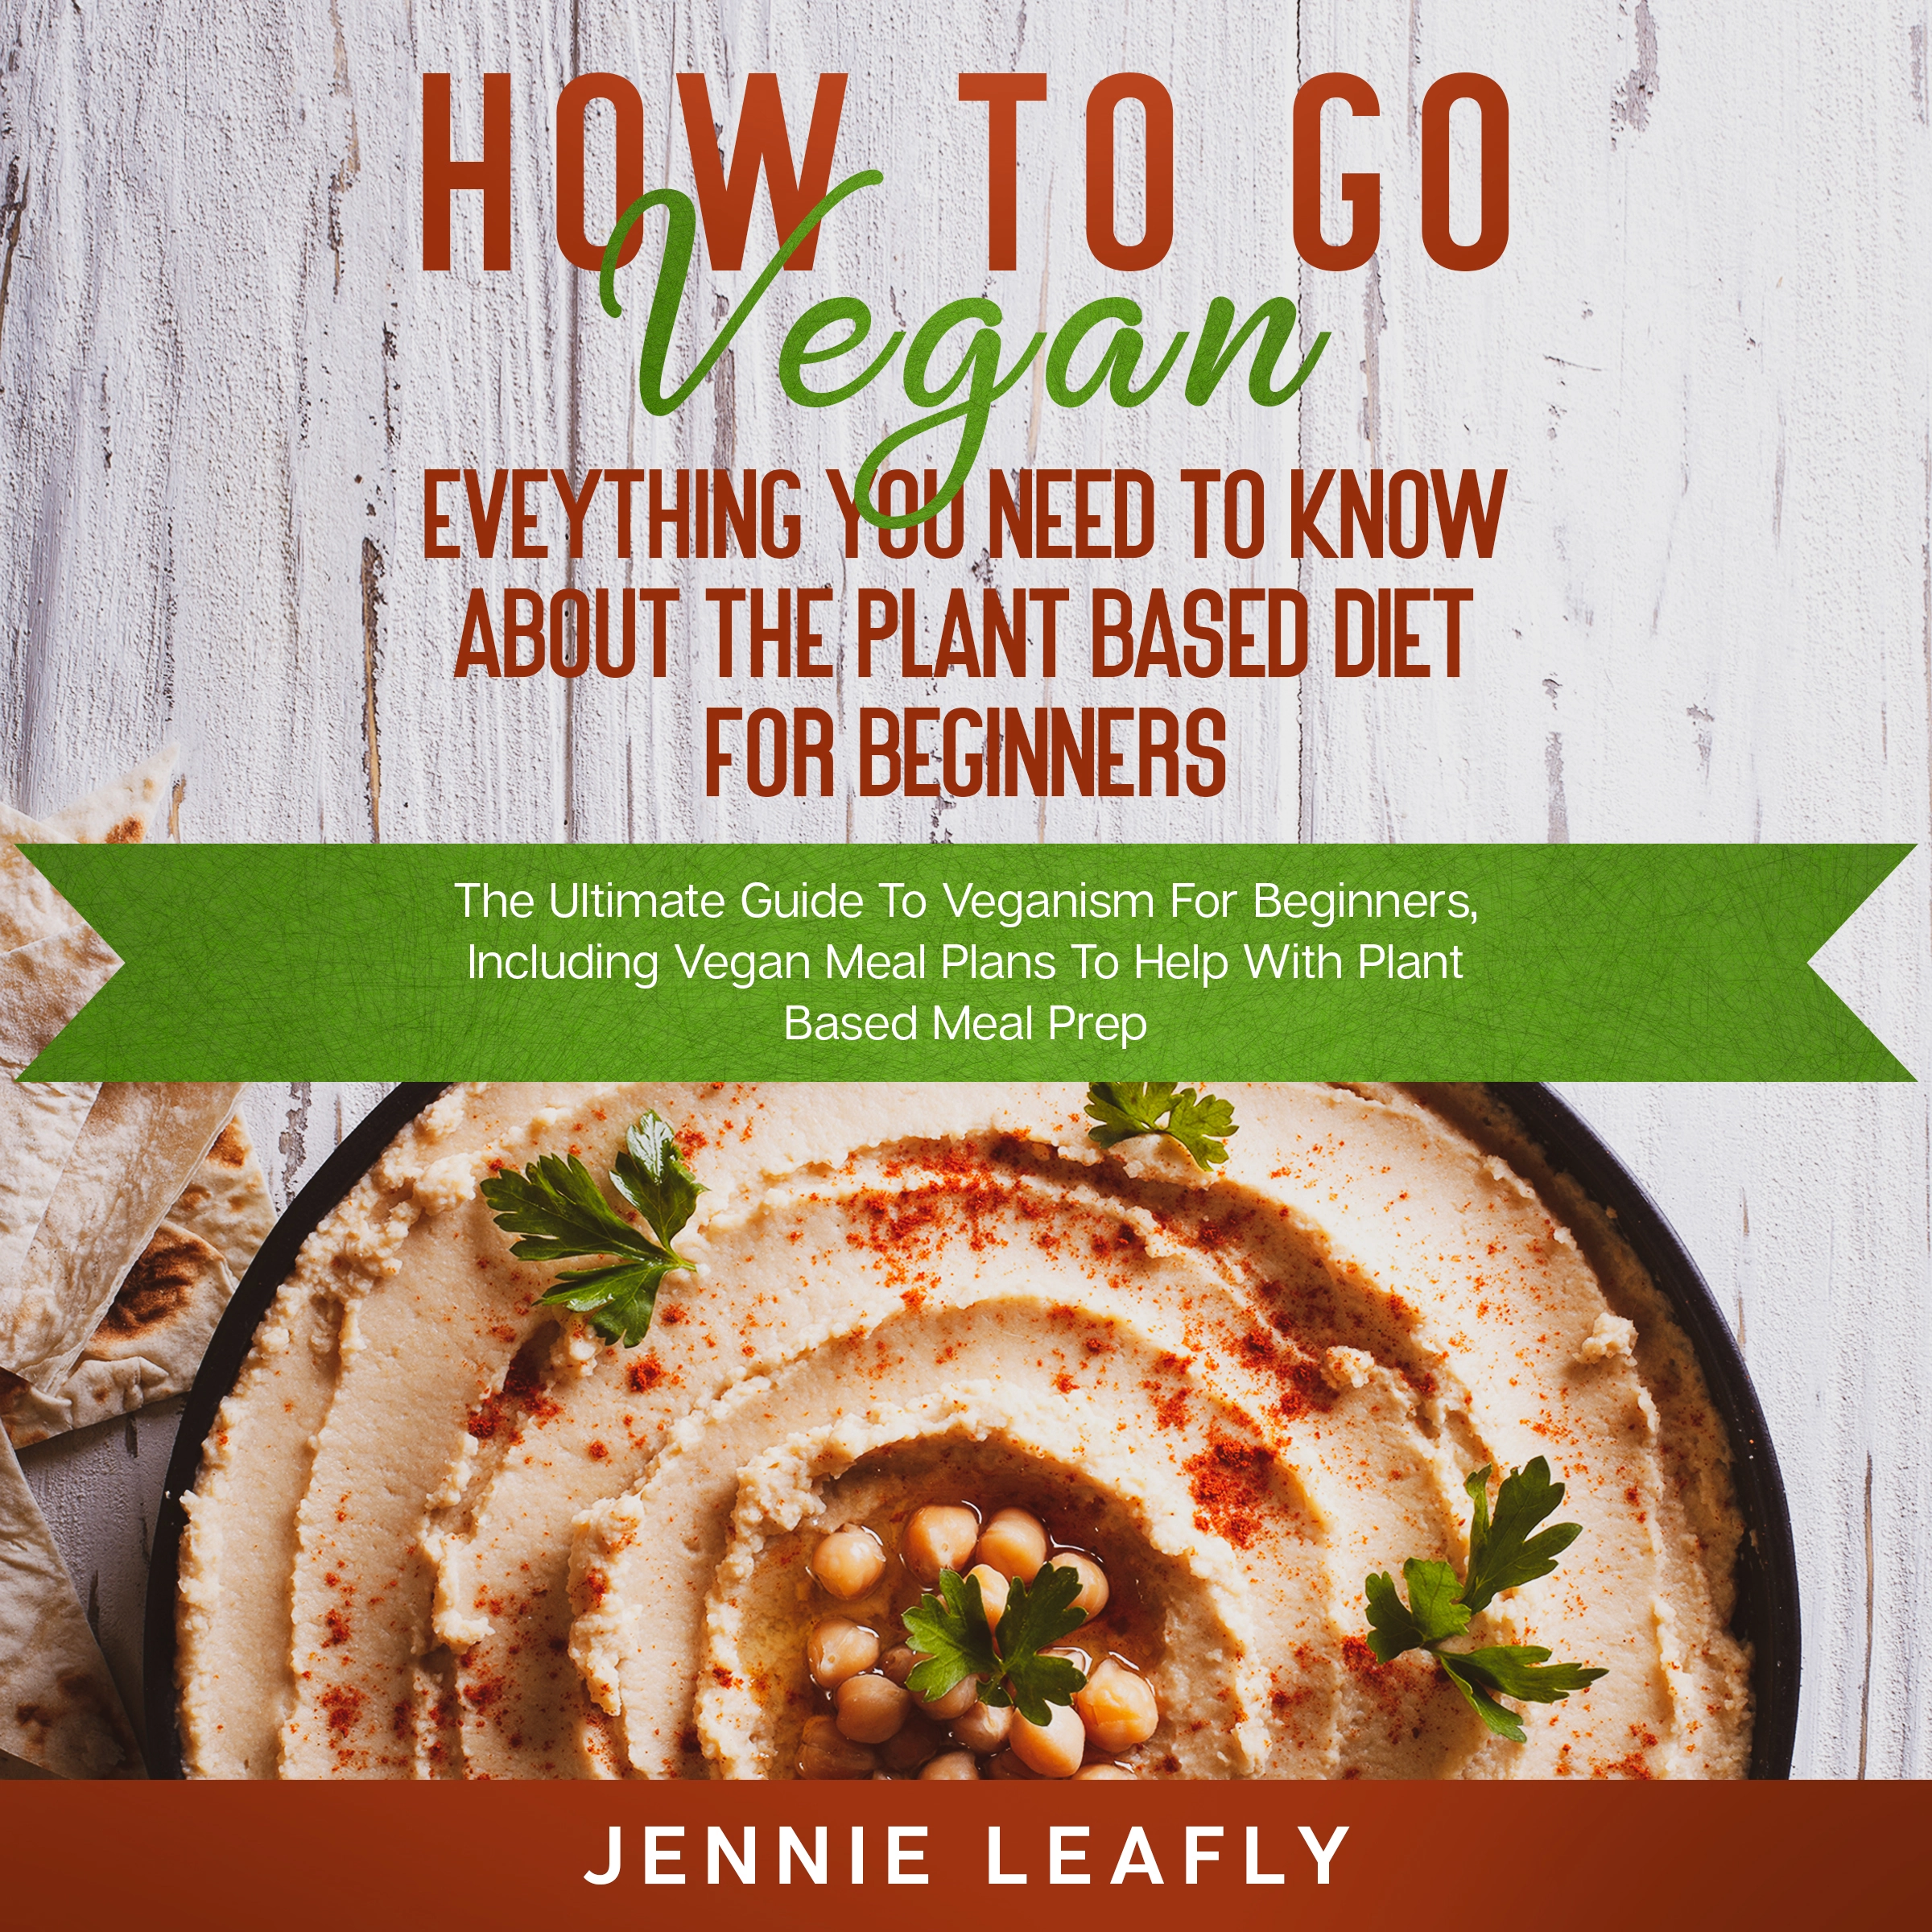 How To Go Vegan: Eveything You Need To Know About The Plant Based Diet for Beginners by Jennie Leafly Audiobook